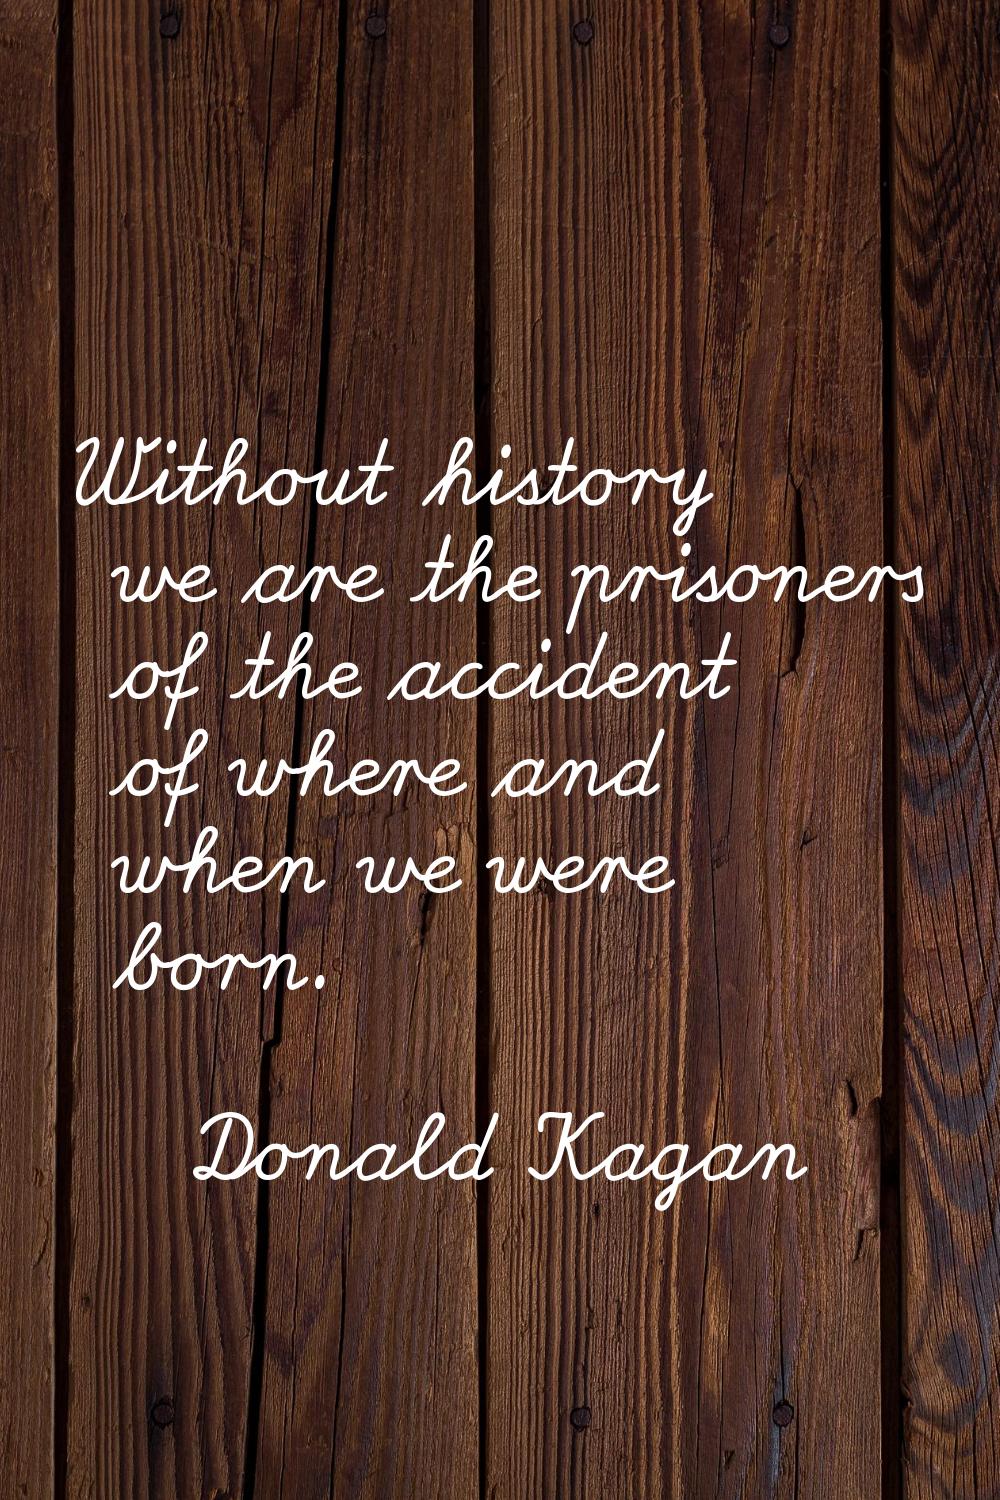 Without history we are the prisoners of the accident of where and when we were born.